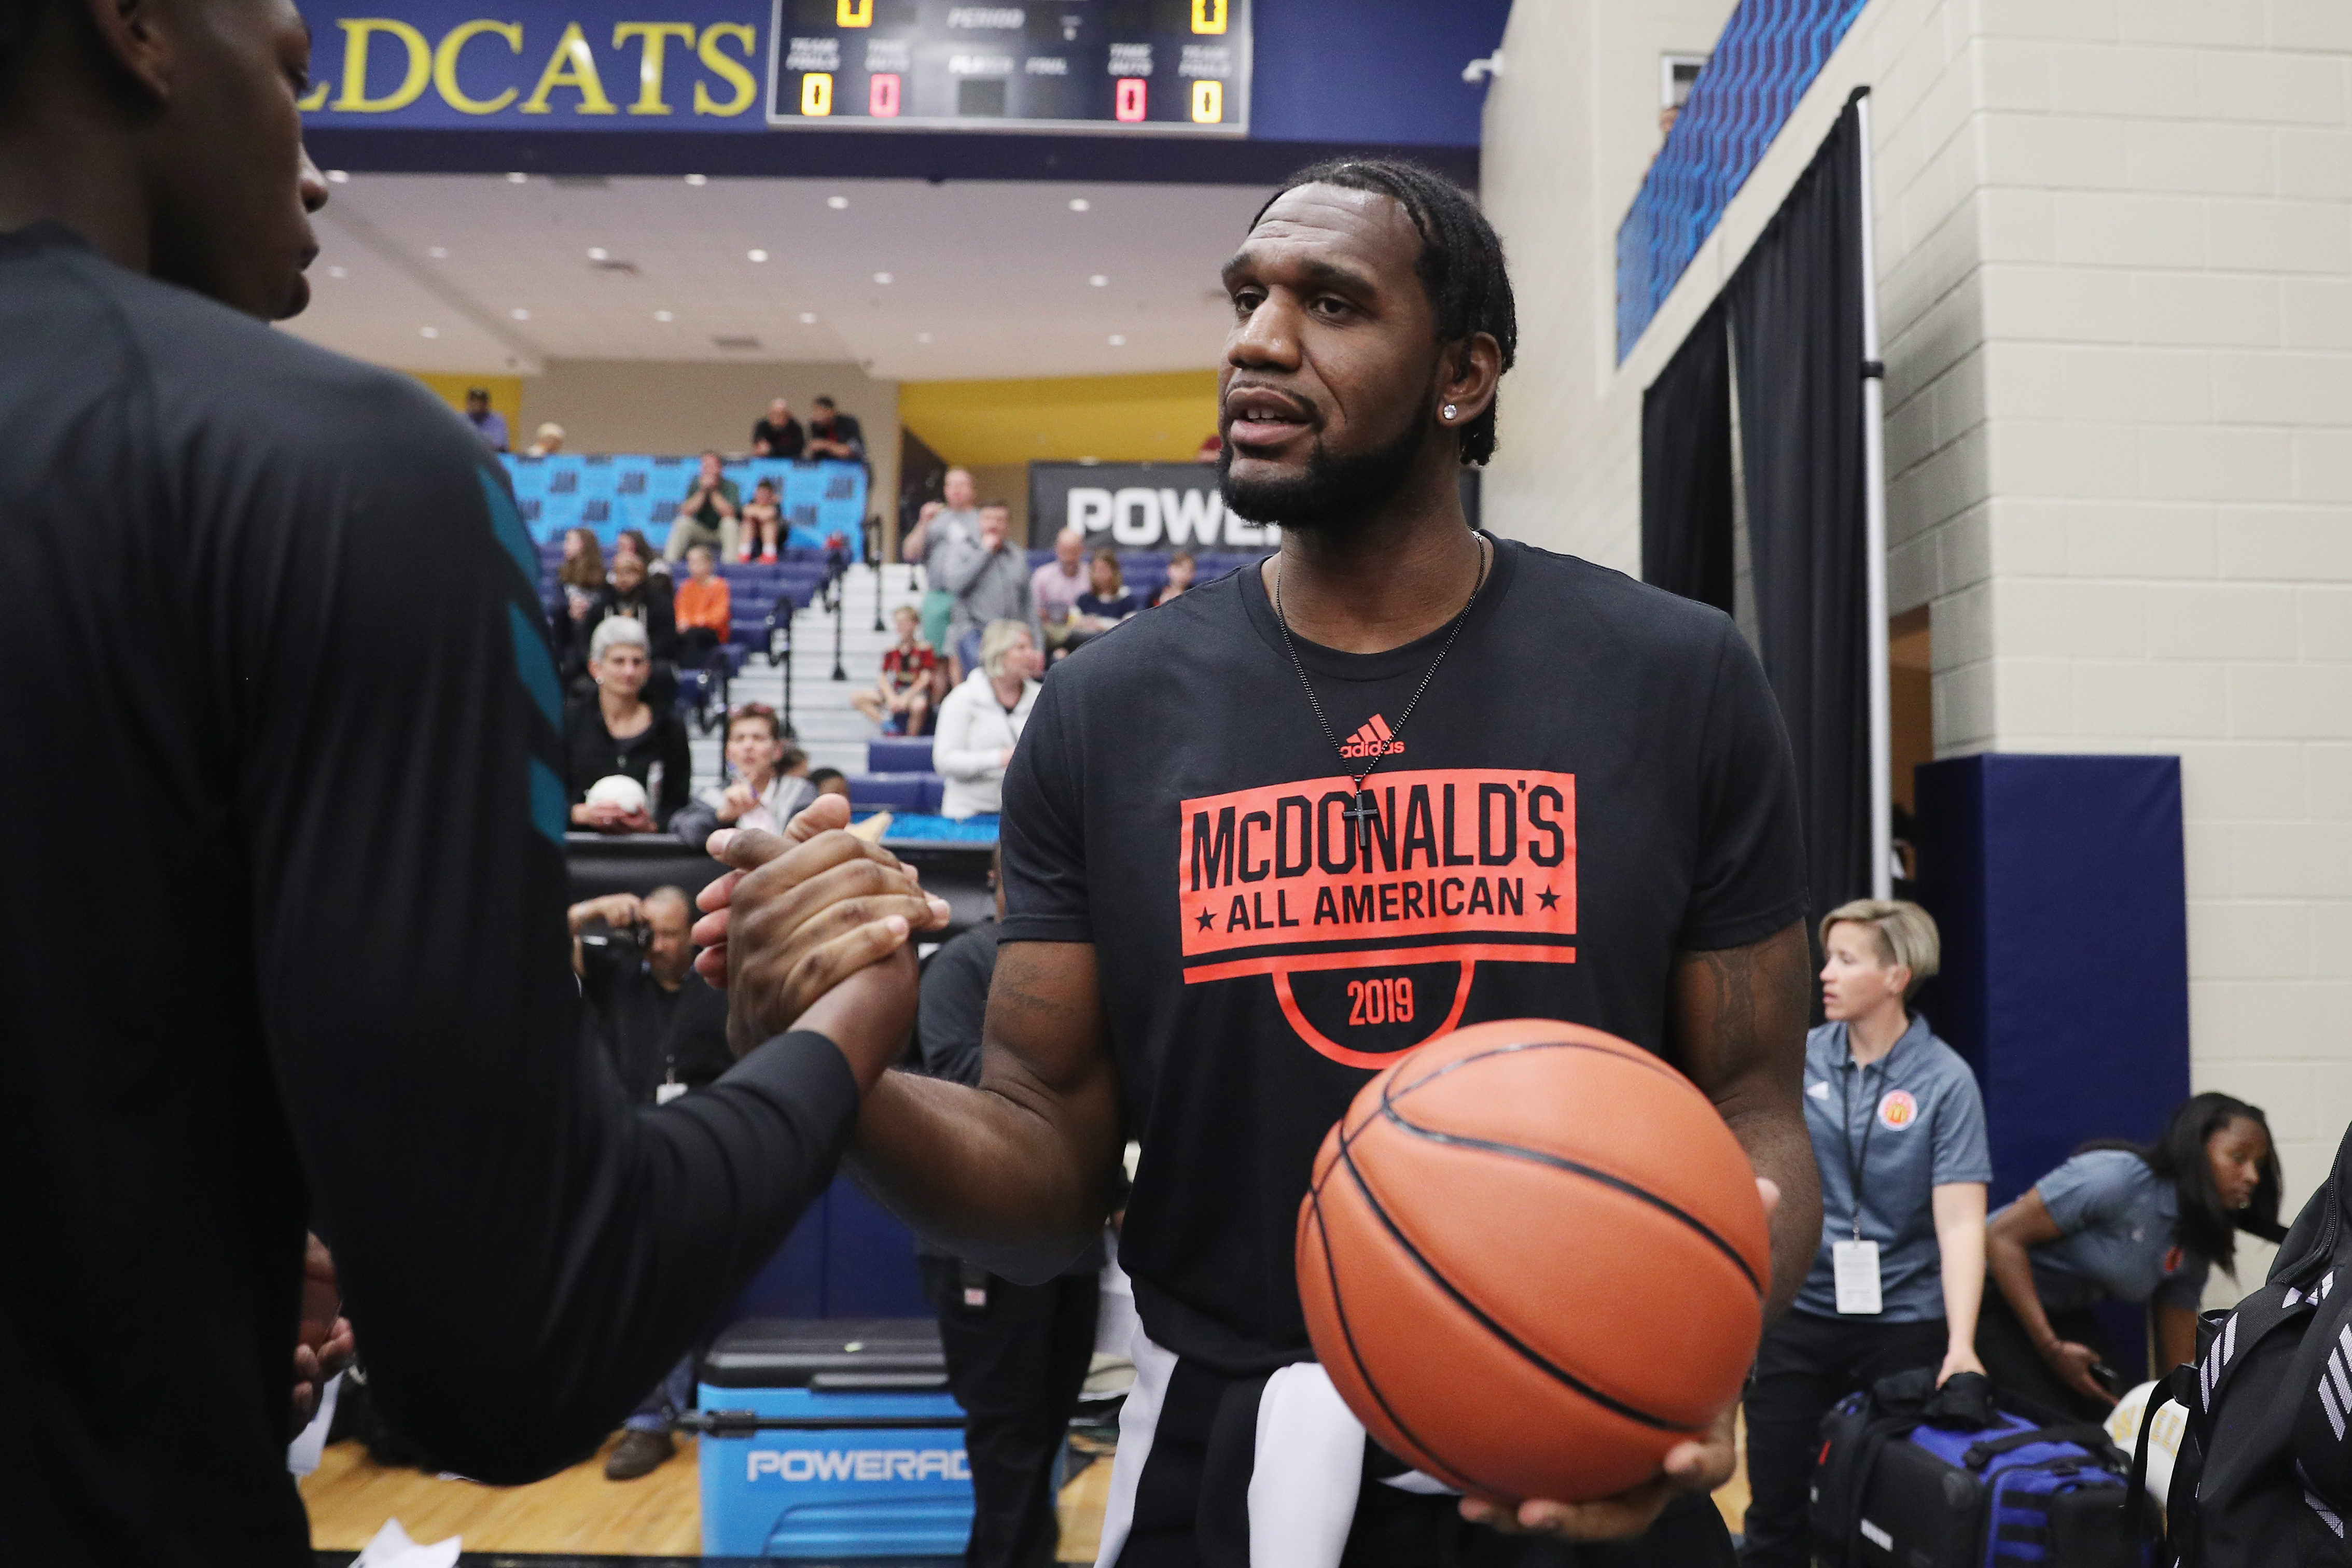 After dealing with NBA 'bust' label, Greg Oden happy again